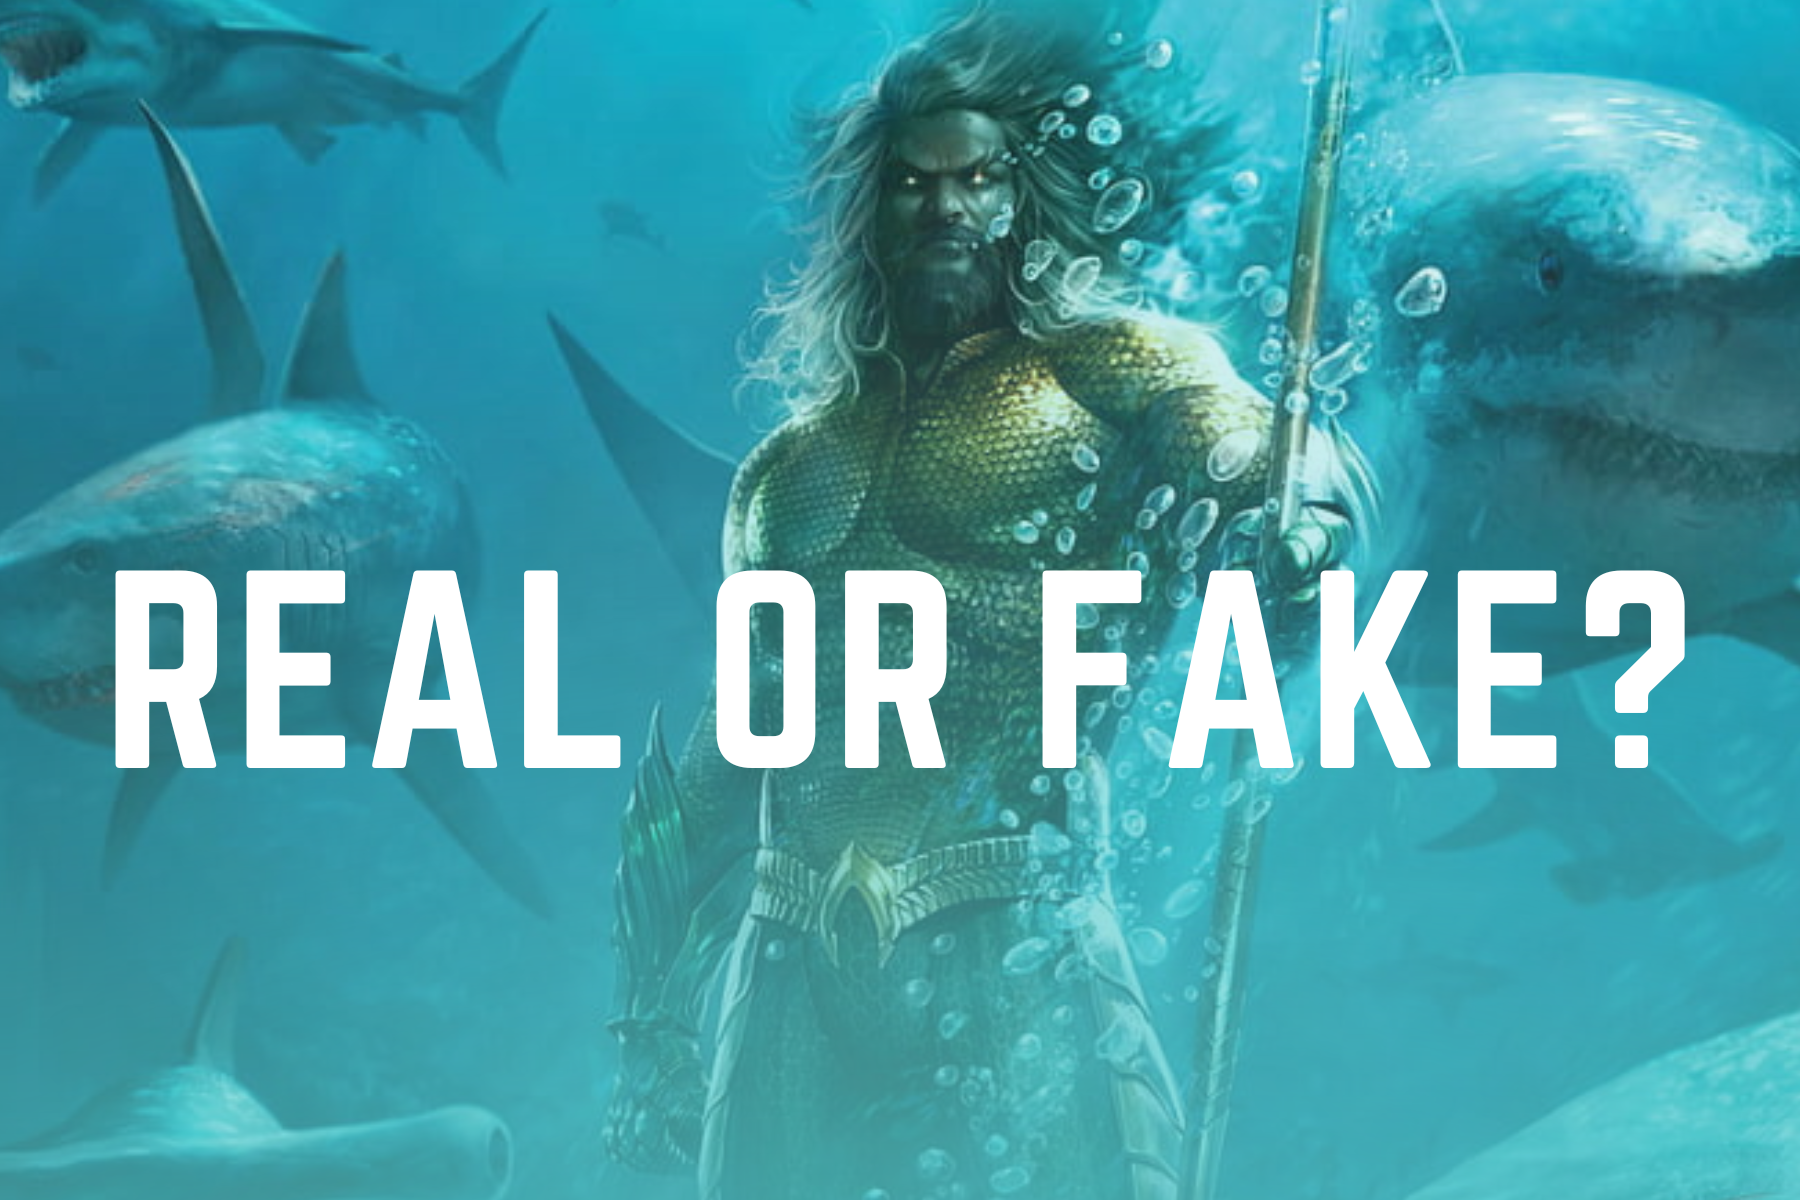 A marine creature and an aquaman in front of the phrase "REAL OR FAKE?"